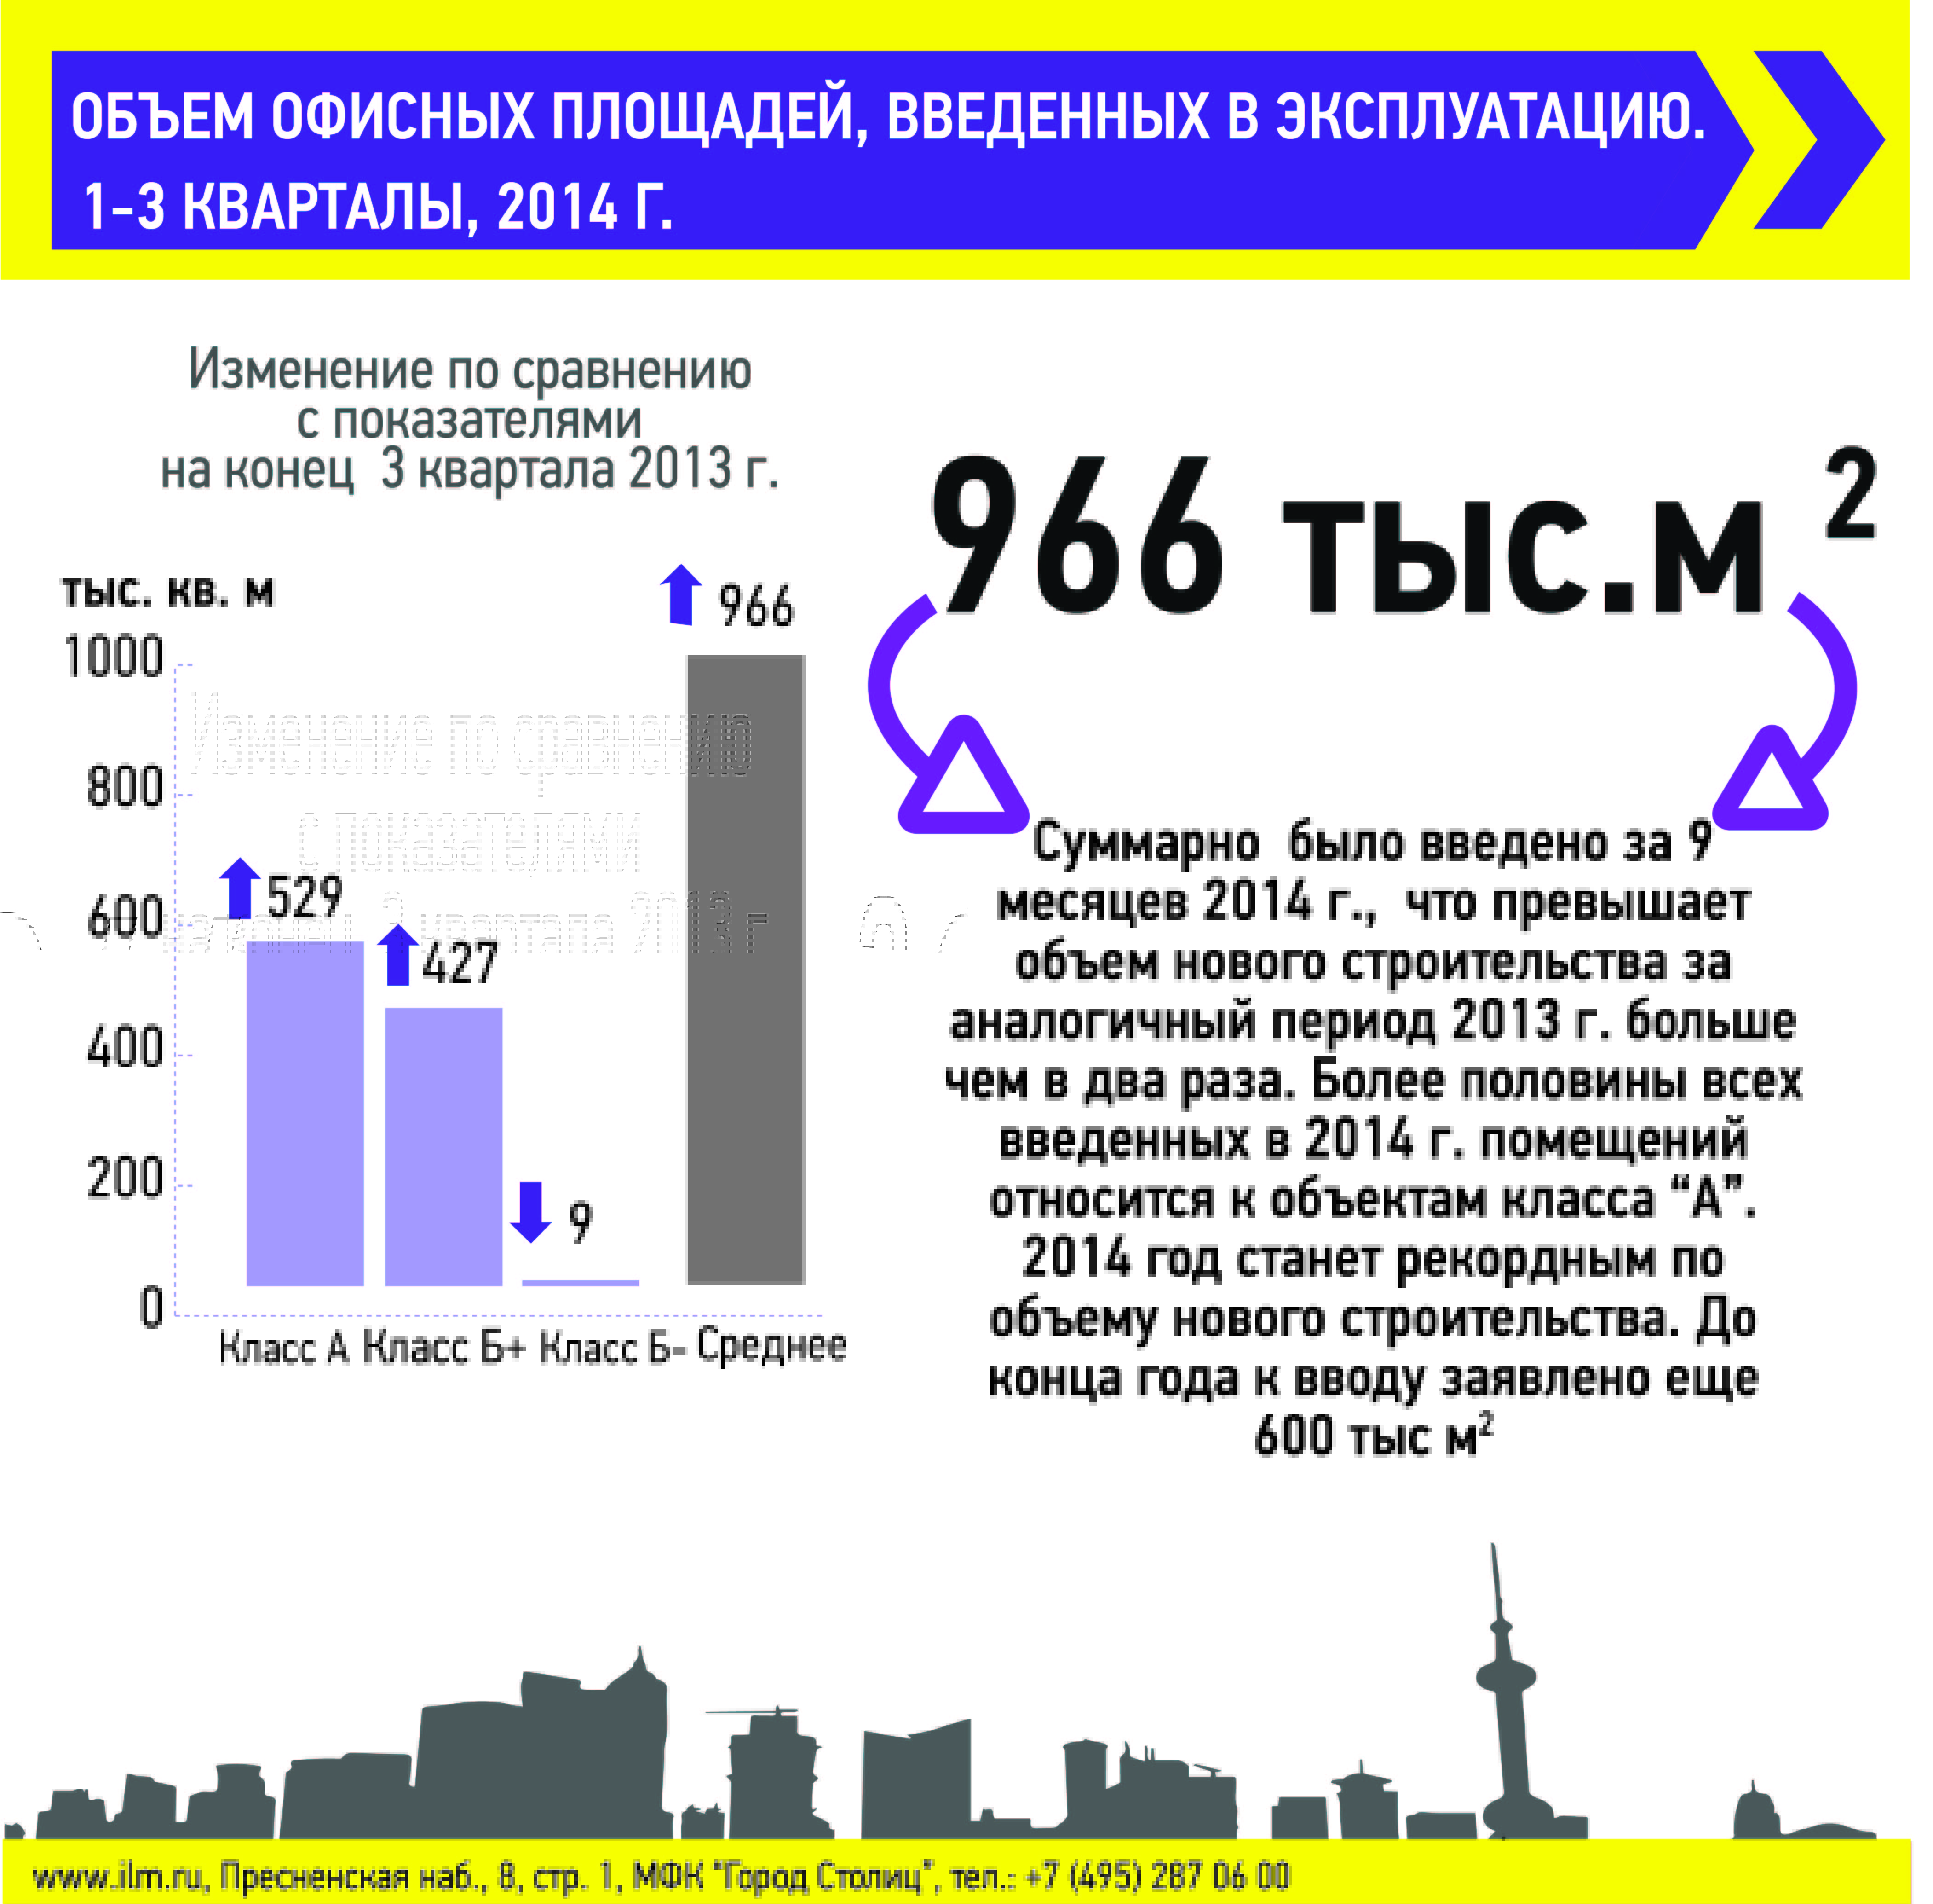 Number of square meters delivered in Q1-Q3 2014